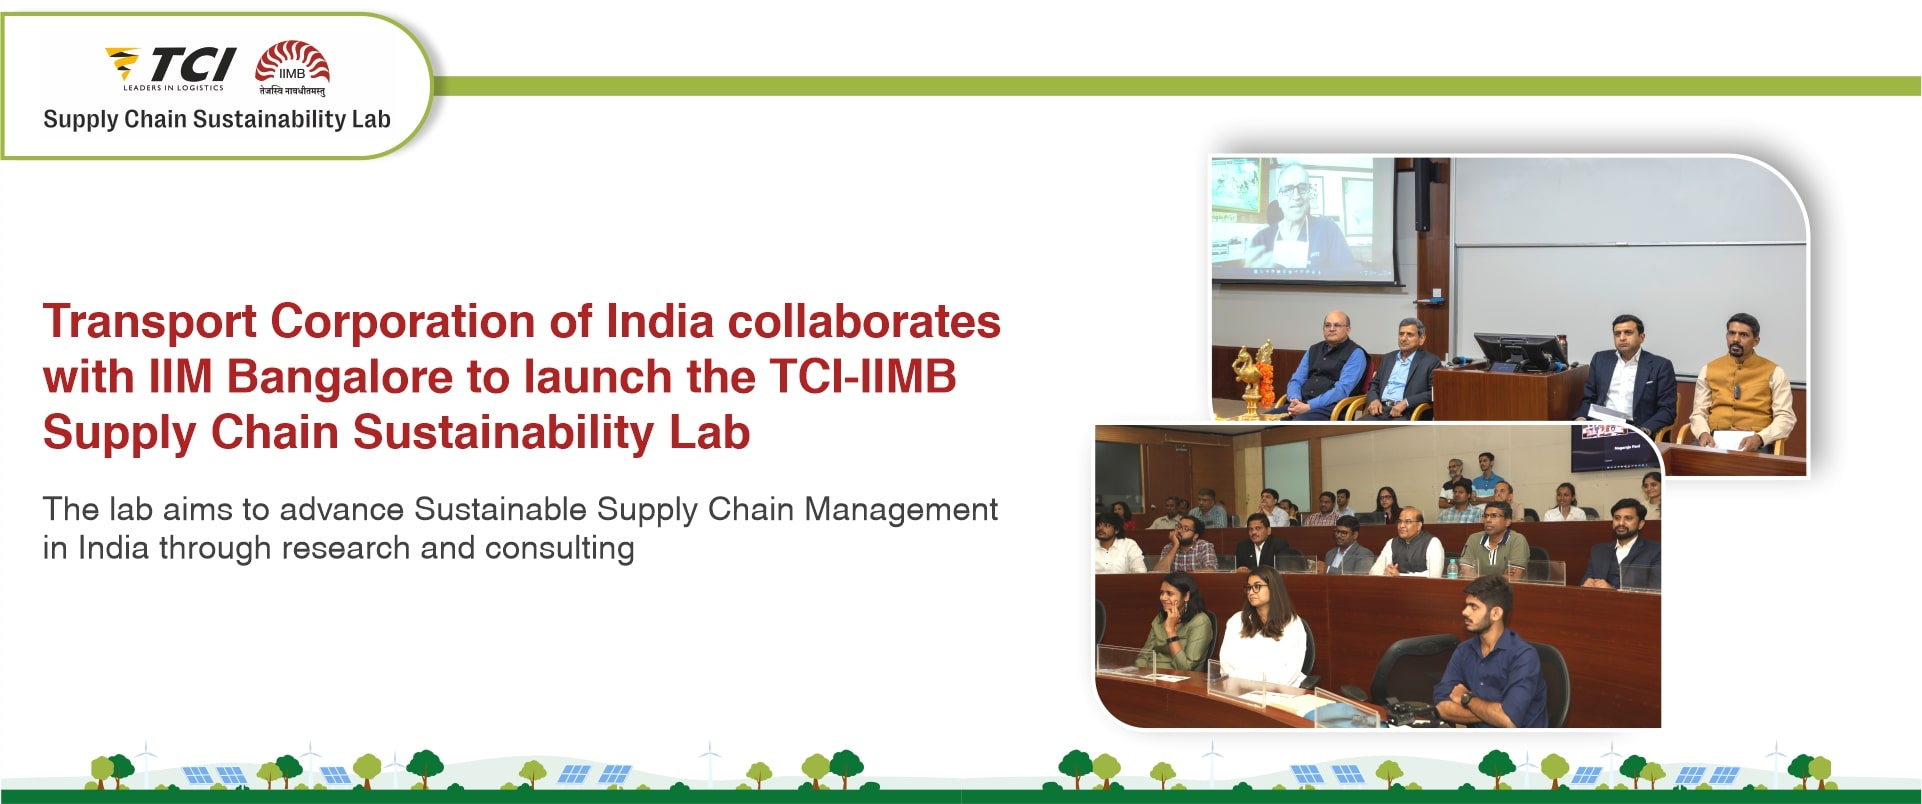 Transport Corporation of India collaborates with IIM Bangalore to launch the TCI-IIMB Supply Chain Sustainability Lab